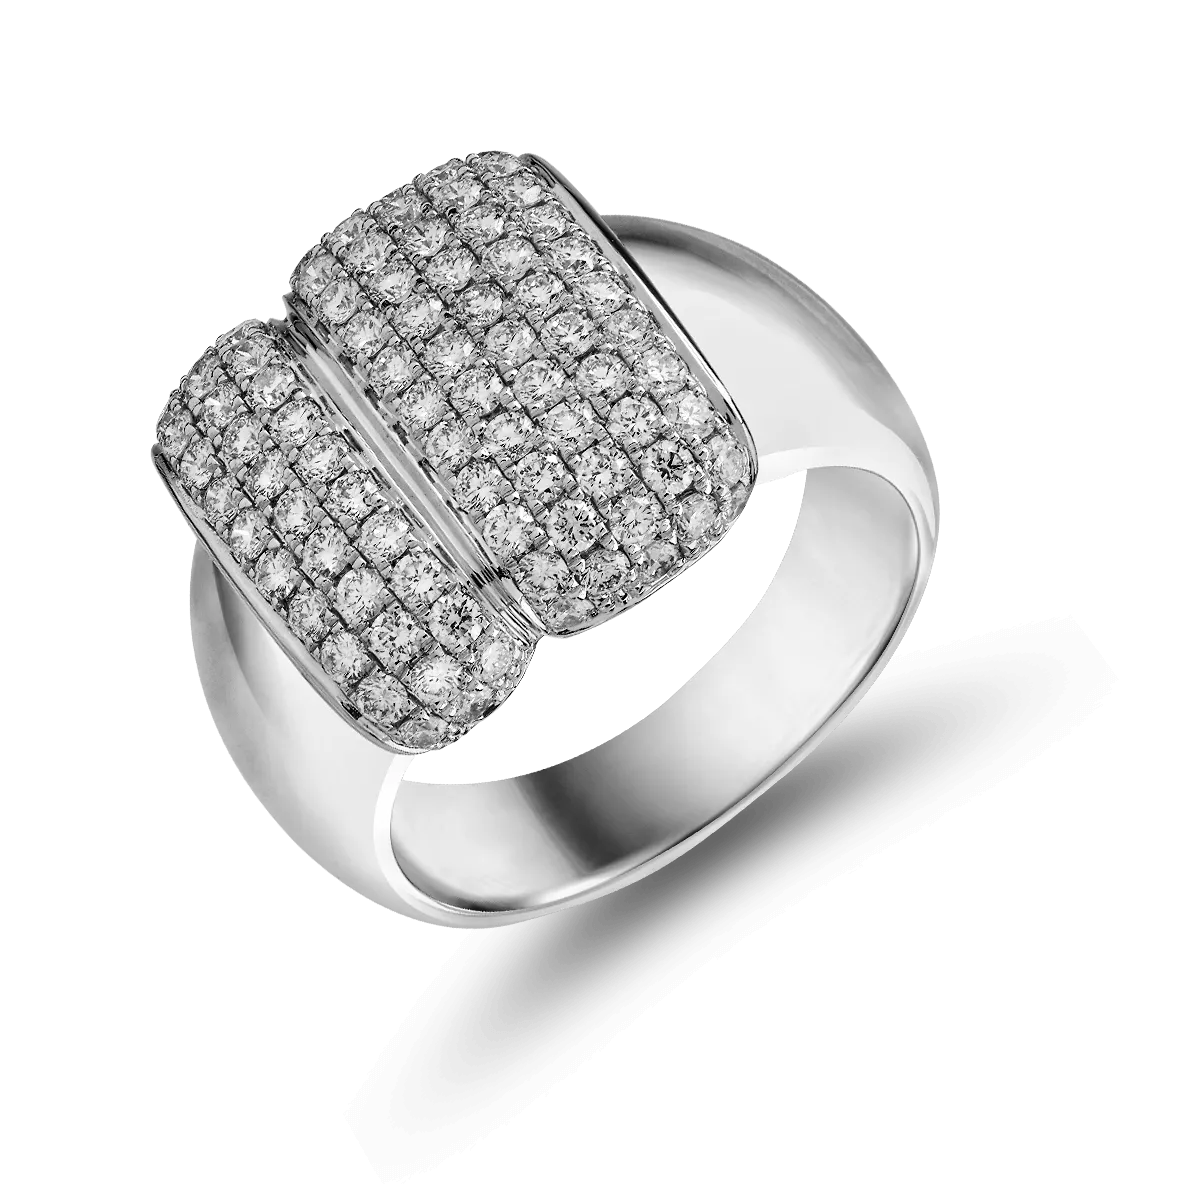 18K white gold ring with 1.41ct diamonds